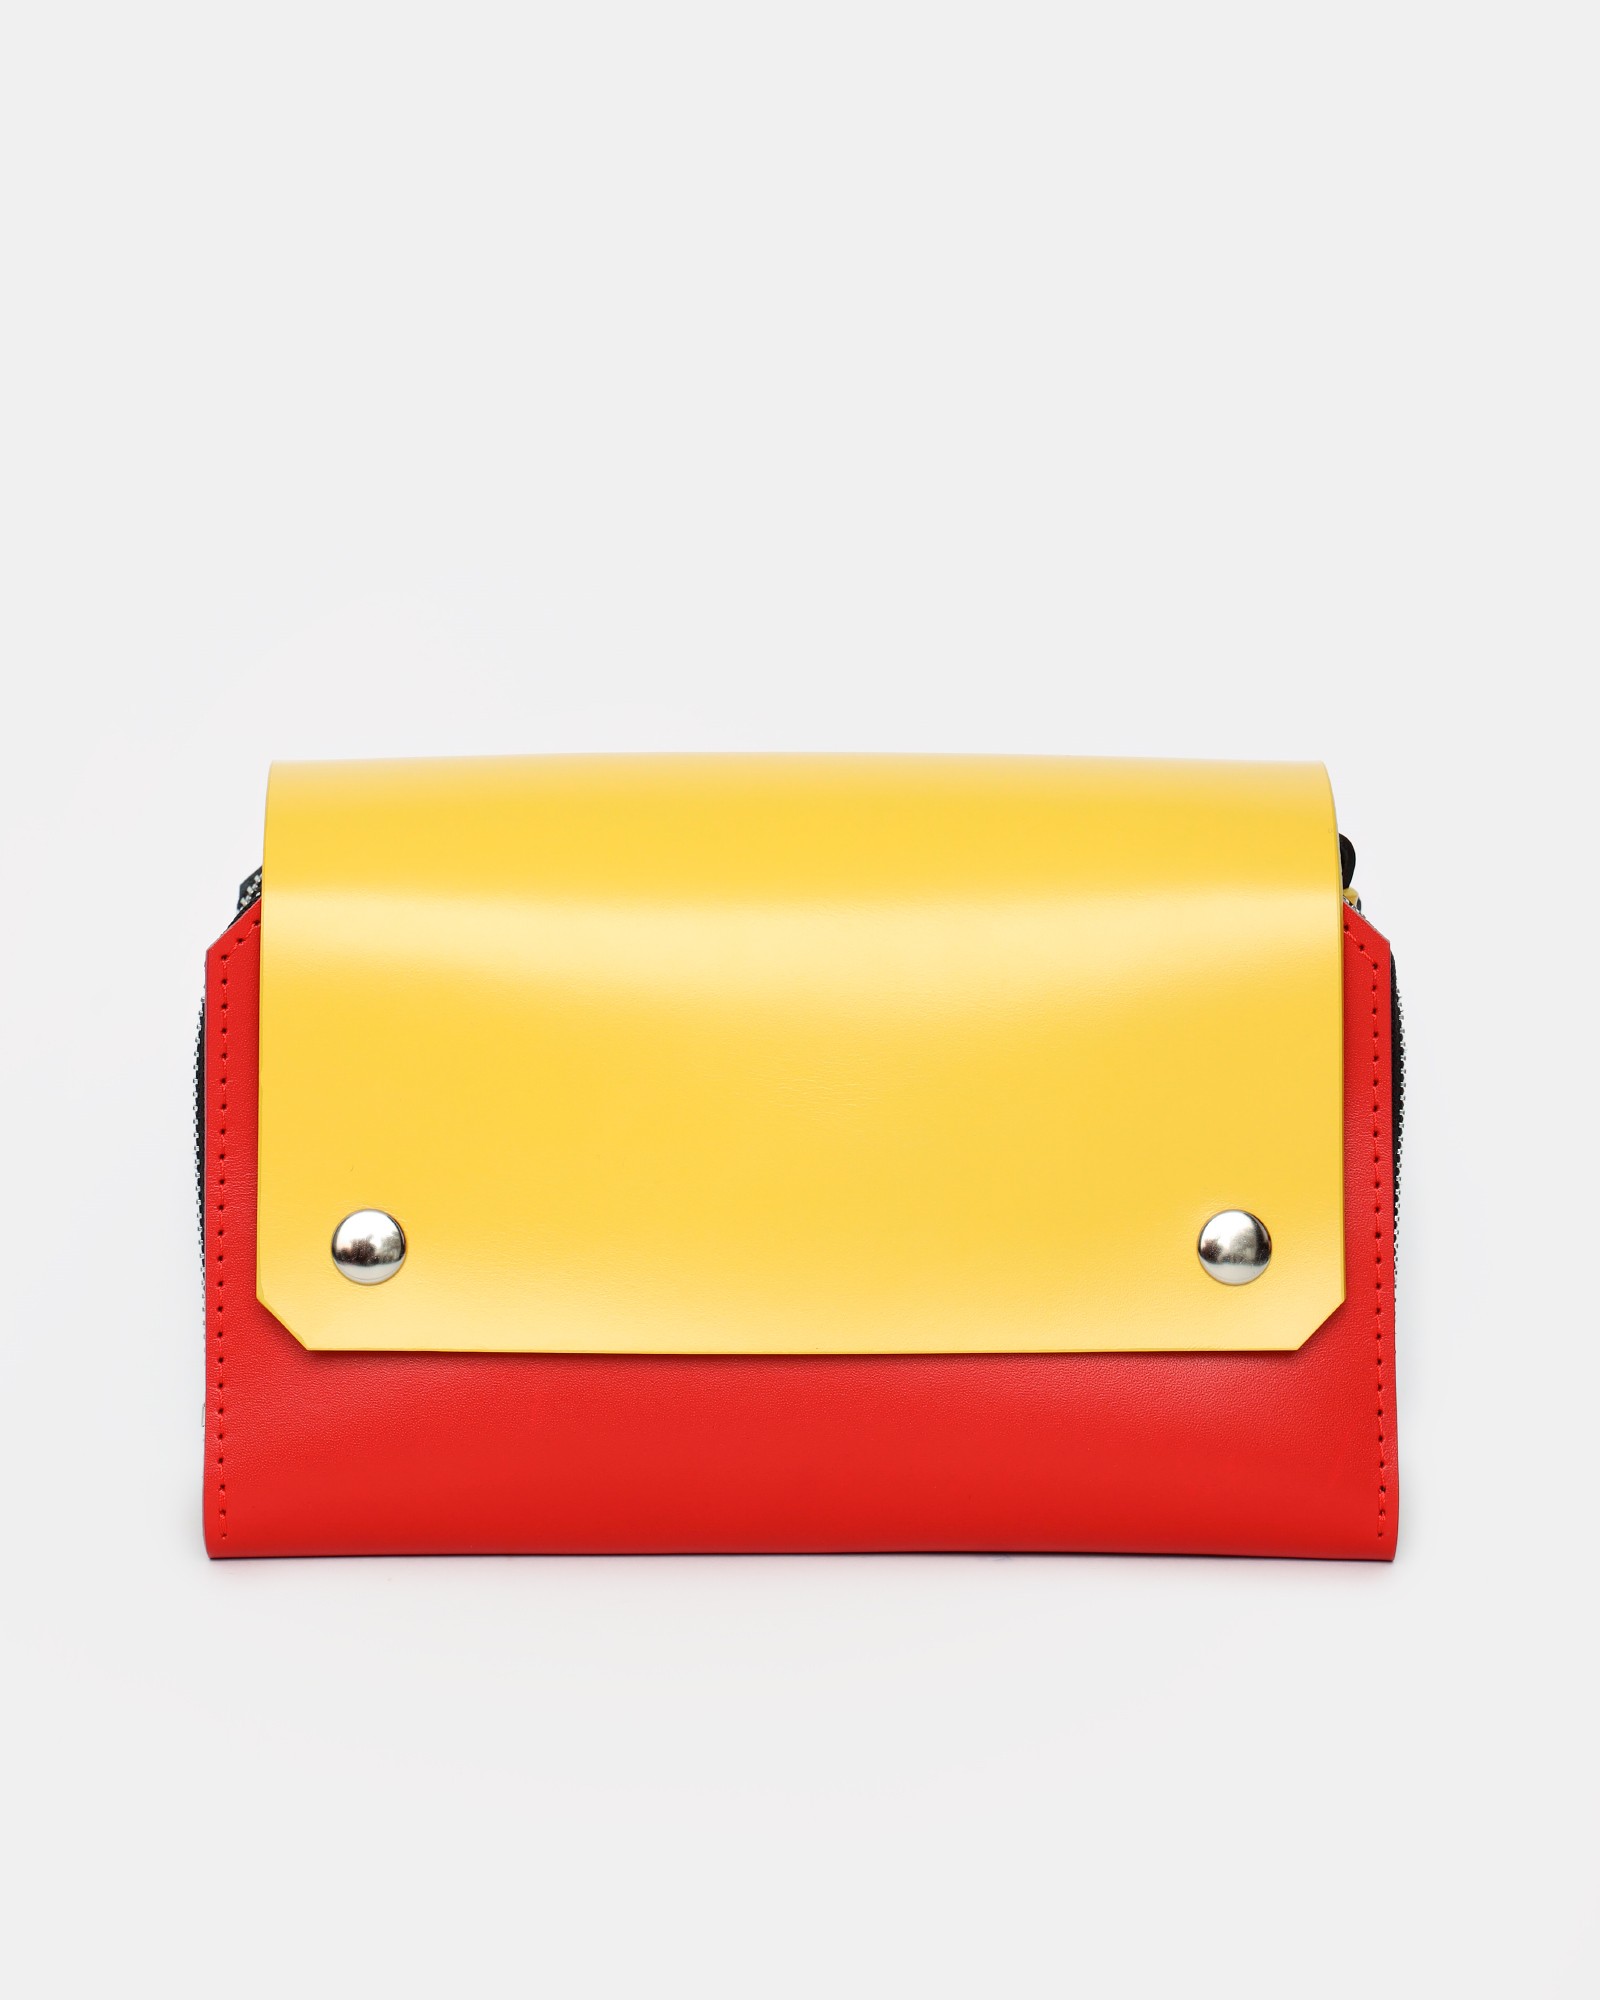 Navi leather bag in yellow, blue and red color